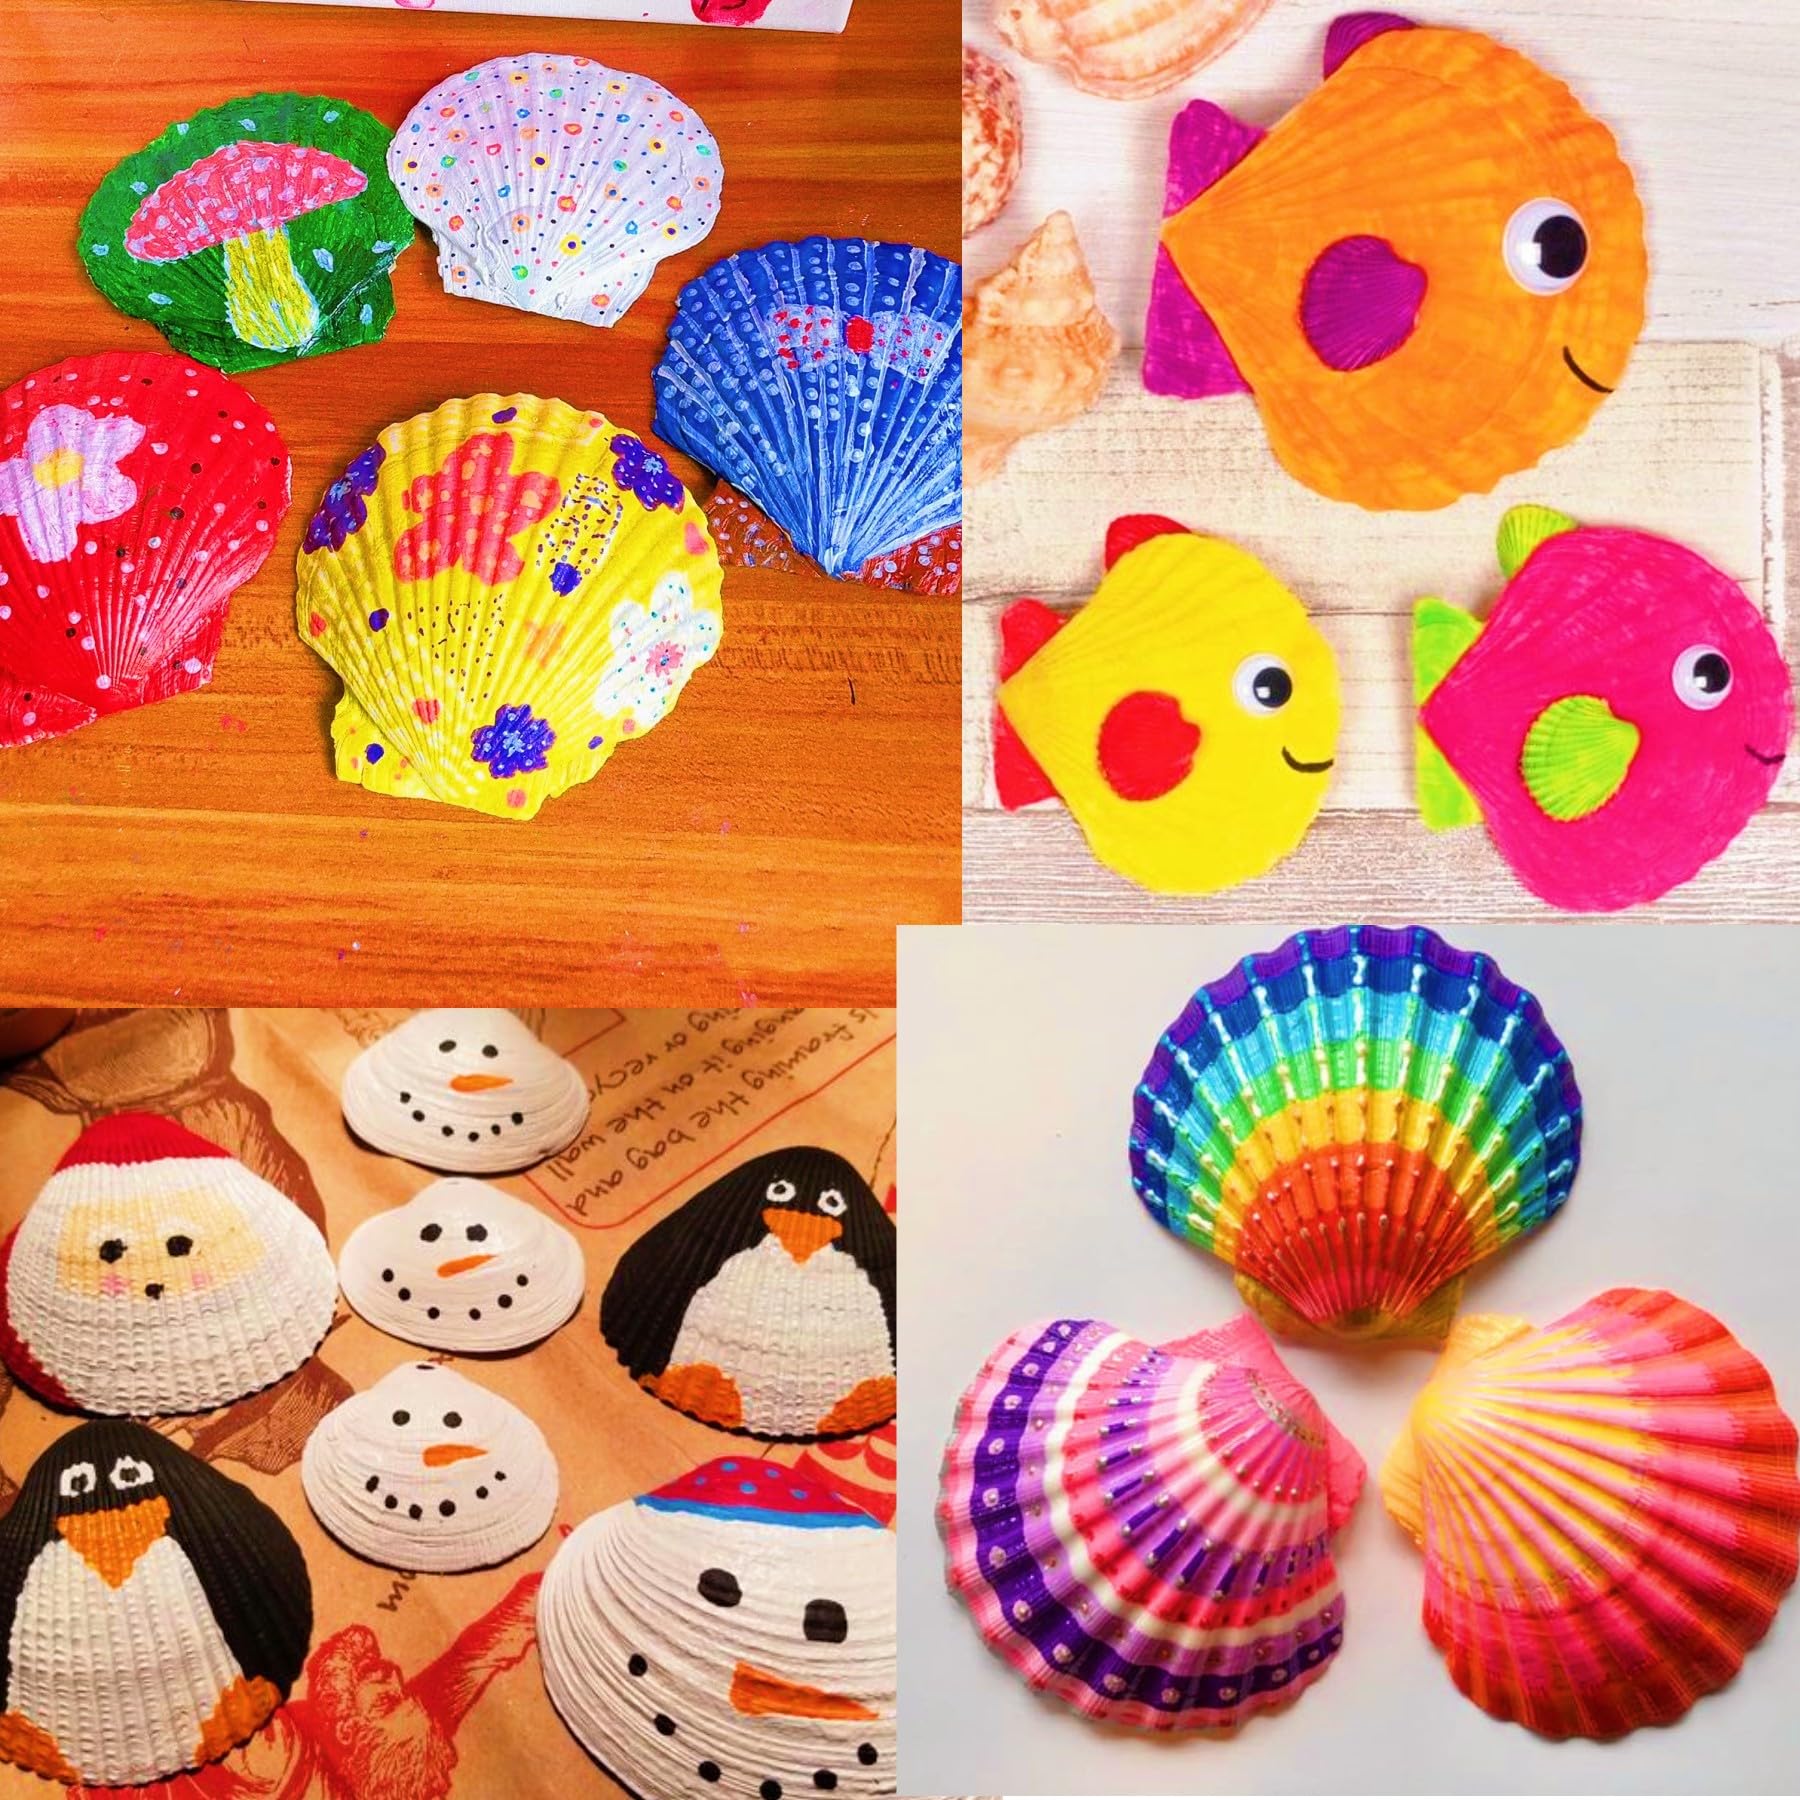 Shell Painting Kit-Arts and Crafts for Girls and Boys Ages 4-12,Craft Kits, Creative Art Supplies for Kids,Birthday Christmas Gifts Painting Toys for 4 5 6 7 8 9 10 11 12 Year Old Kids Activities